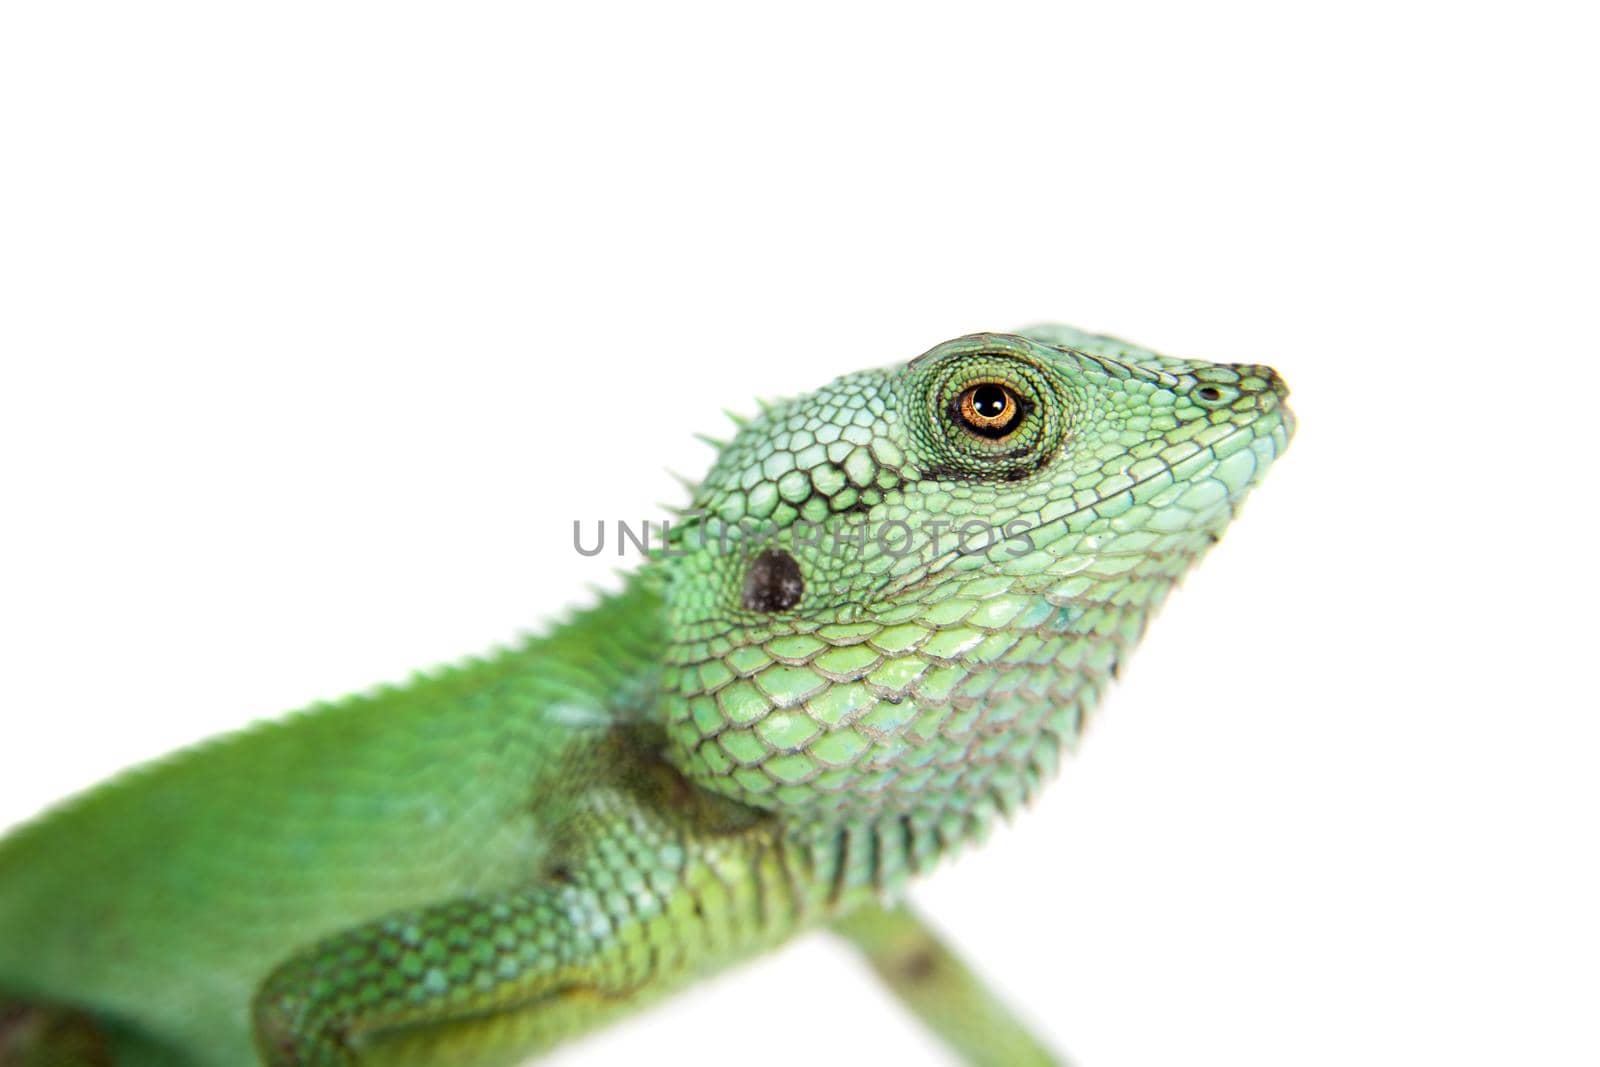 Black lipped Lizard, Calotes nigrilabris, on white by RosaJay